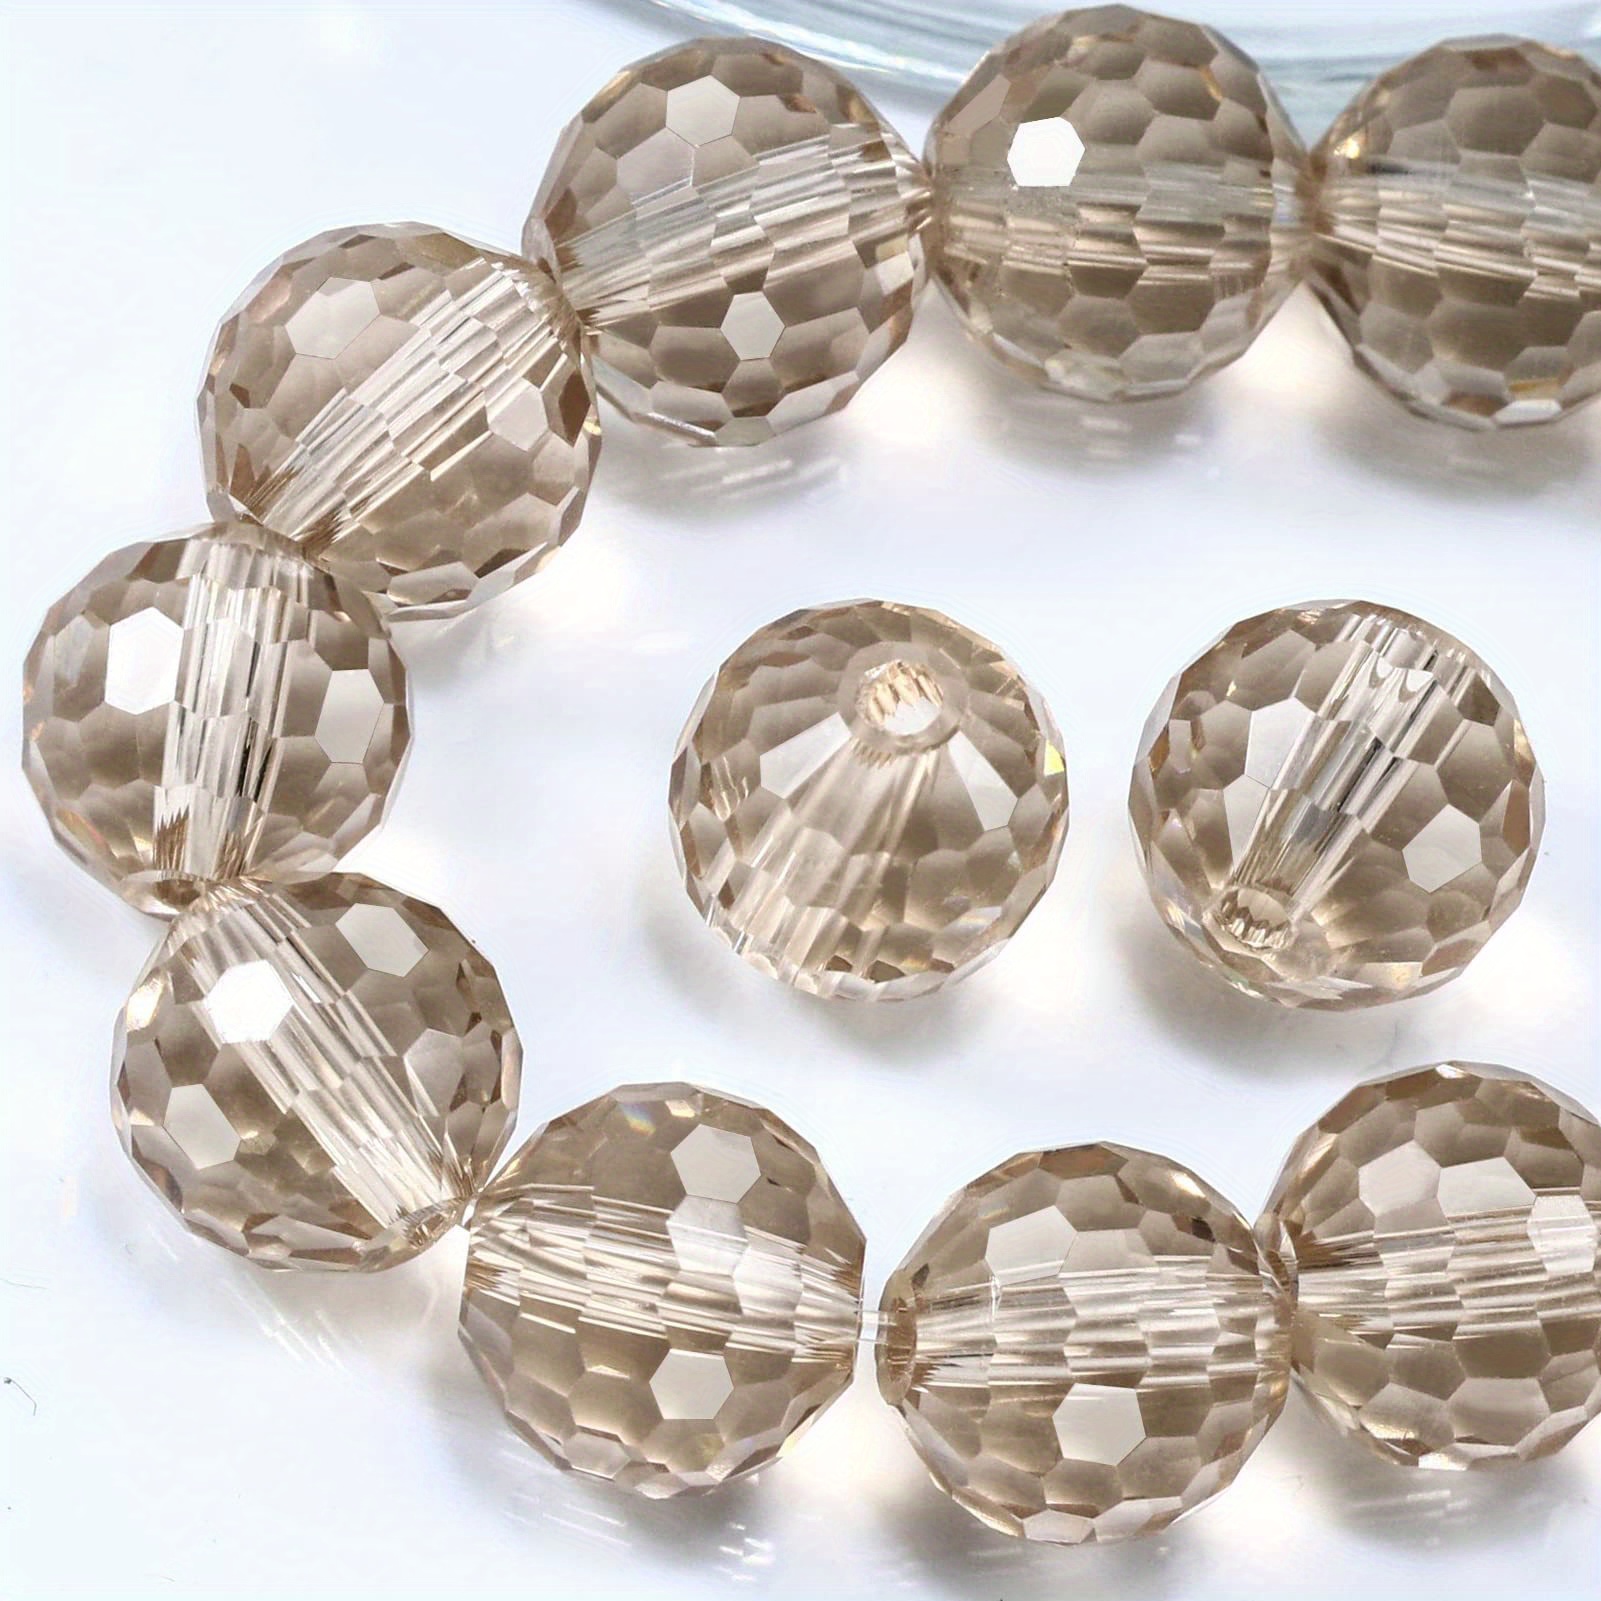 Swarovski Crystal 5000 8mm Clear Faceted Round Beads - 12 Pack